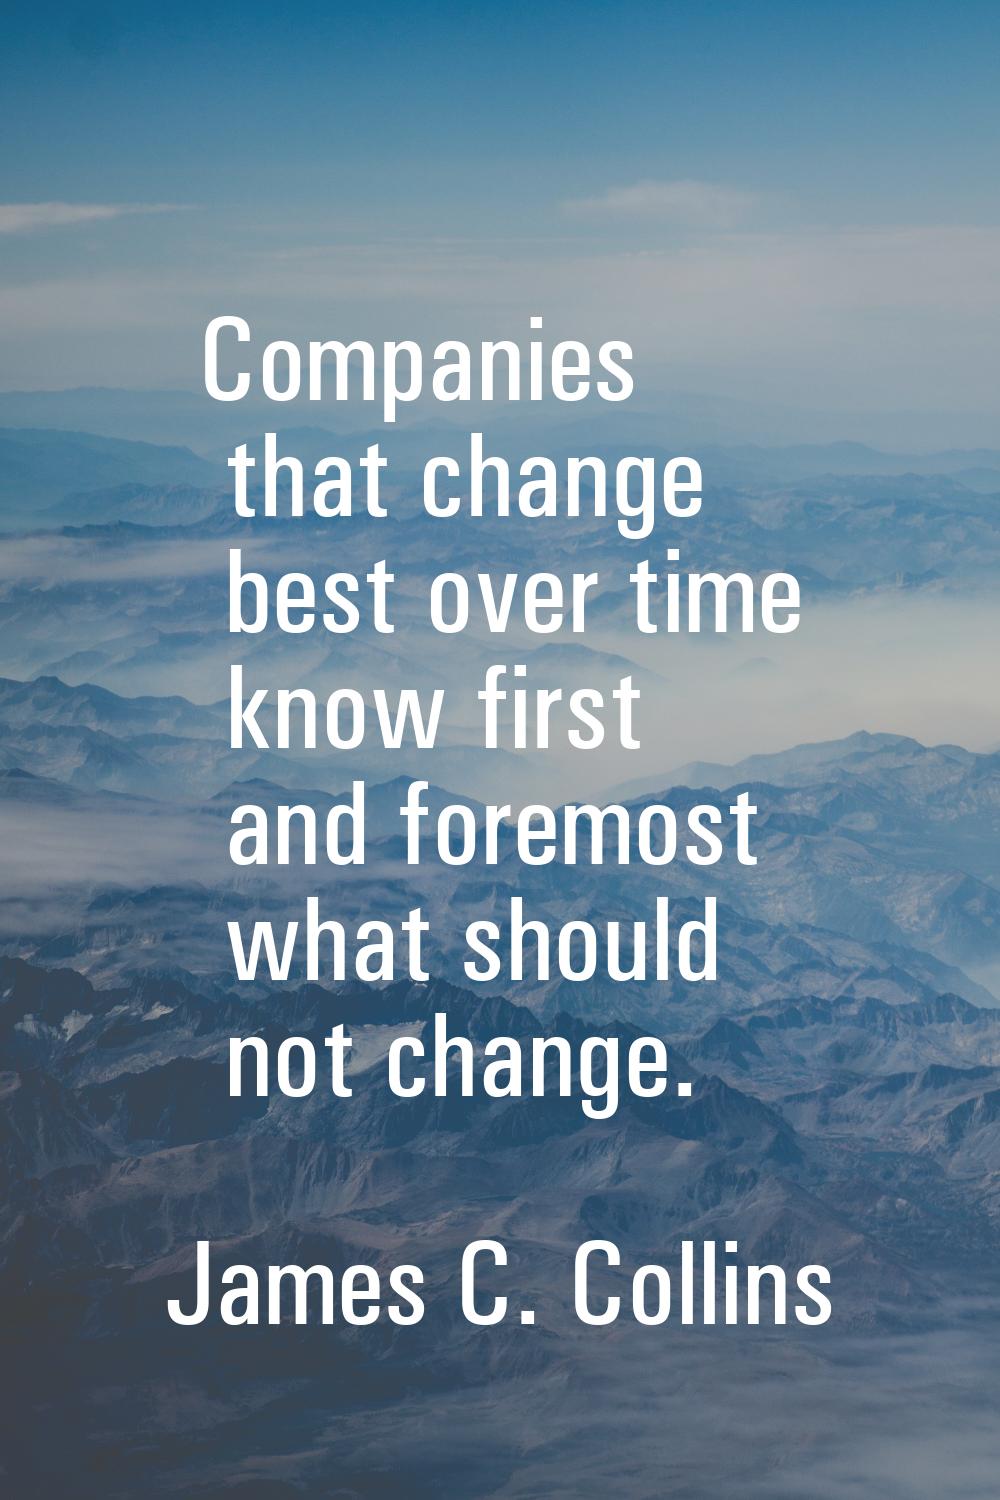 Companies that change best over time know first and foremost what should not change.